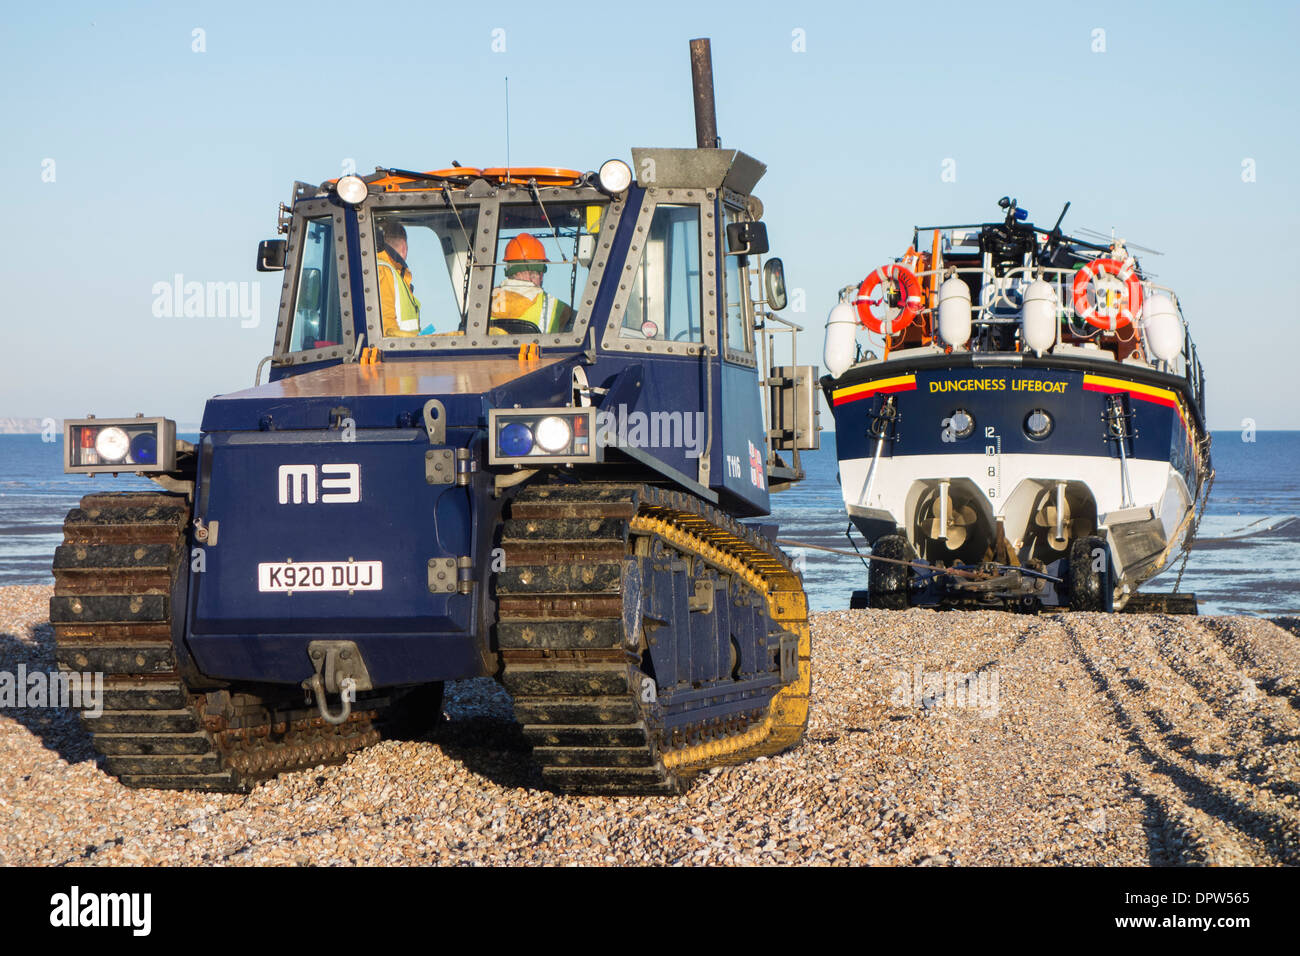 A tractor tows the 'Mersey Class' lifeboat across a shingle beach towards Dungeness RNLI lifeboat station, Kent, England Stock Photo